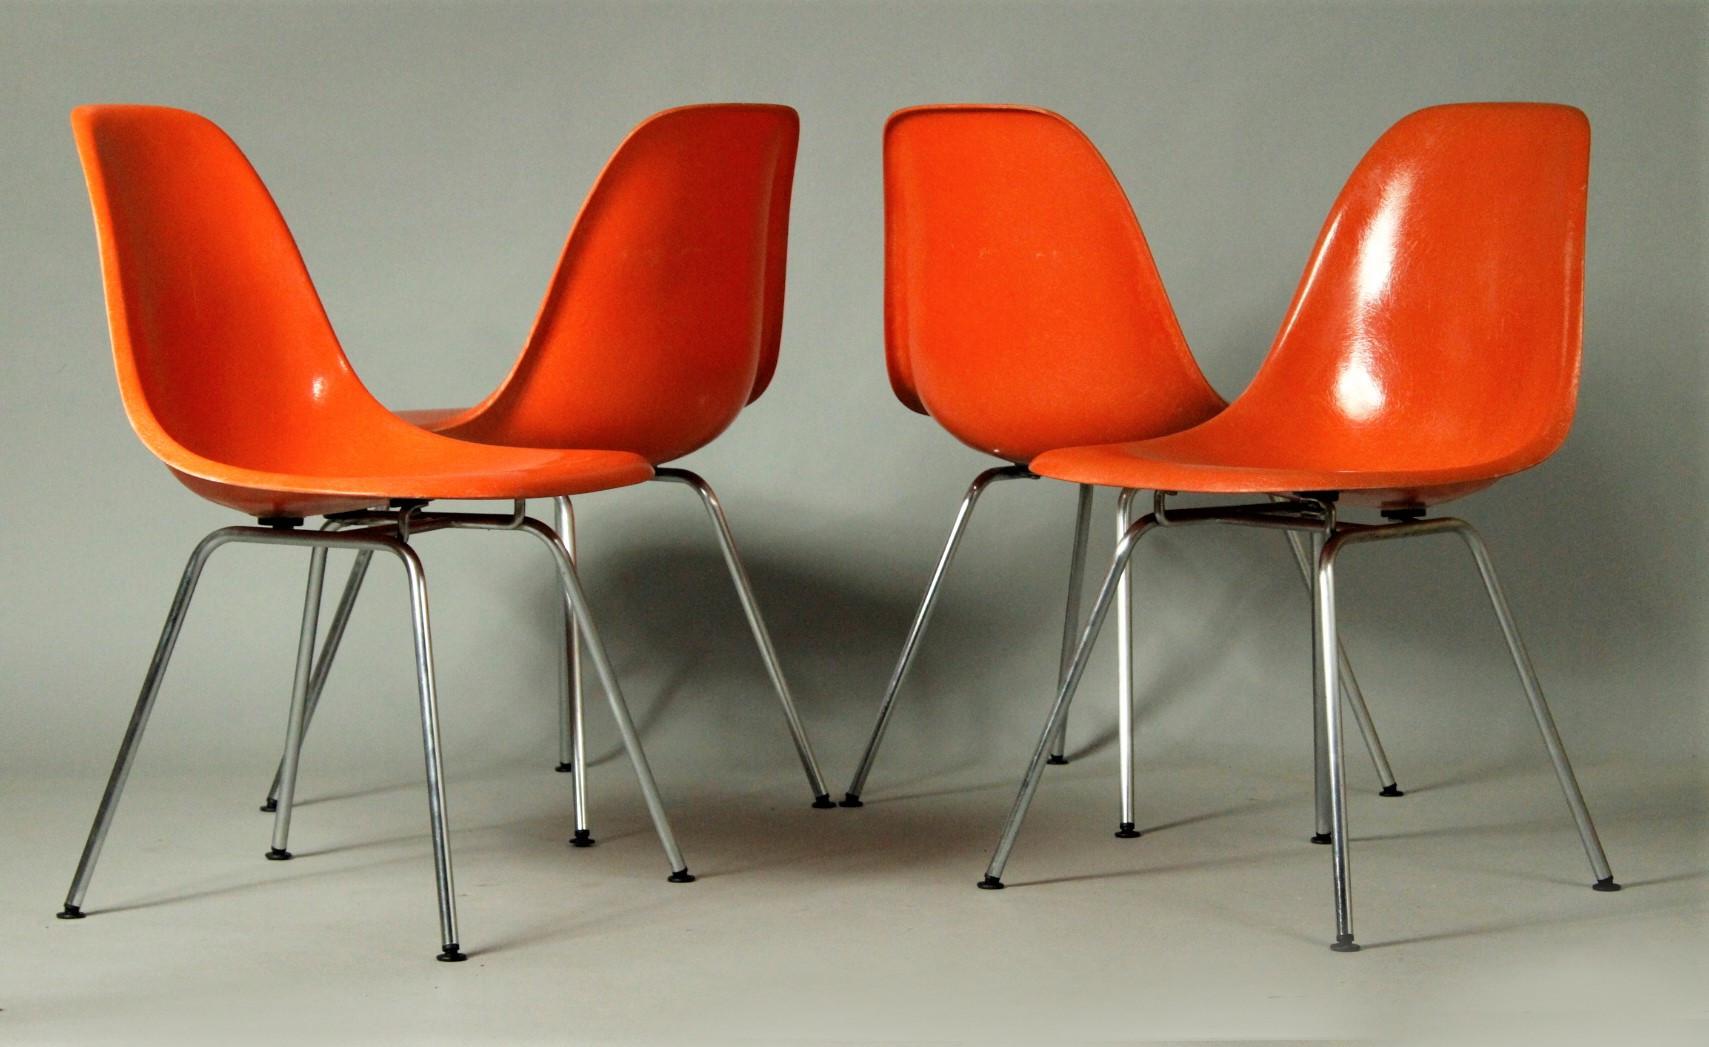 Chrome Early Production Set of 4 Fiberglass Chairs by Eames for Herman Miller, 1950s For Sale